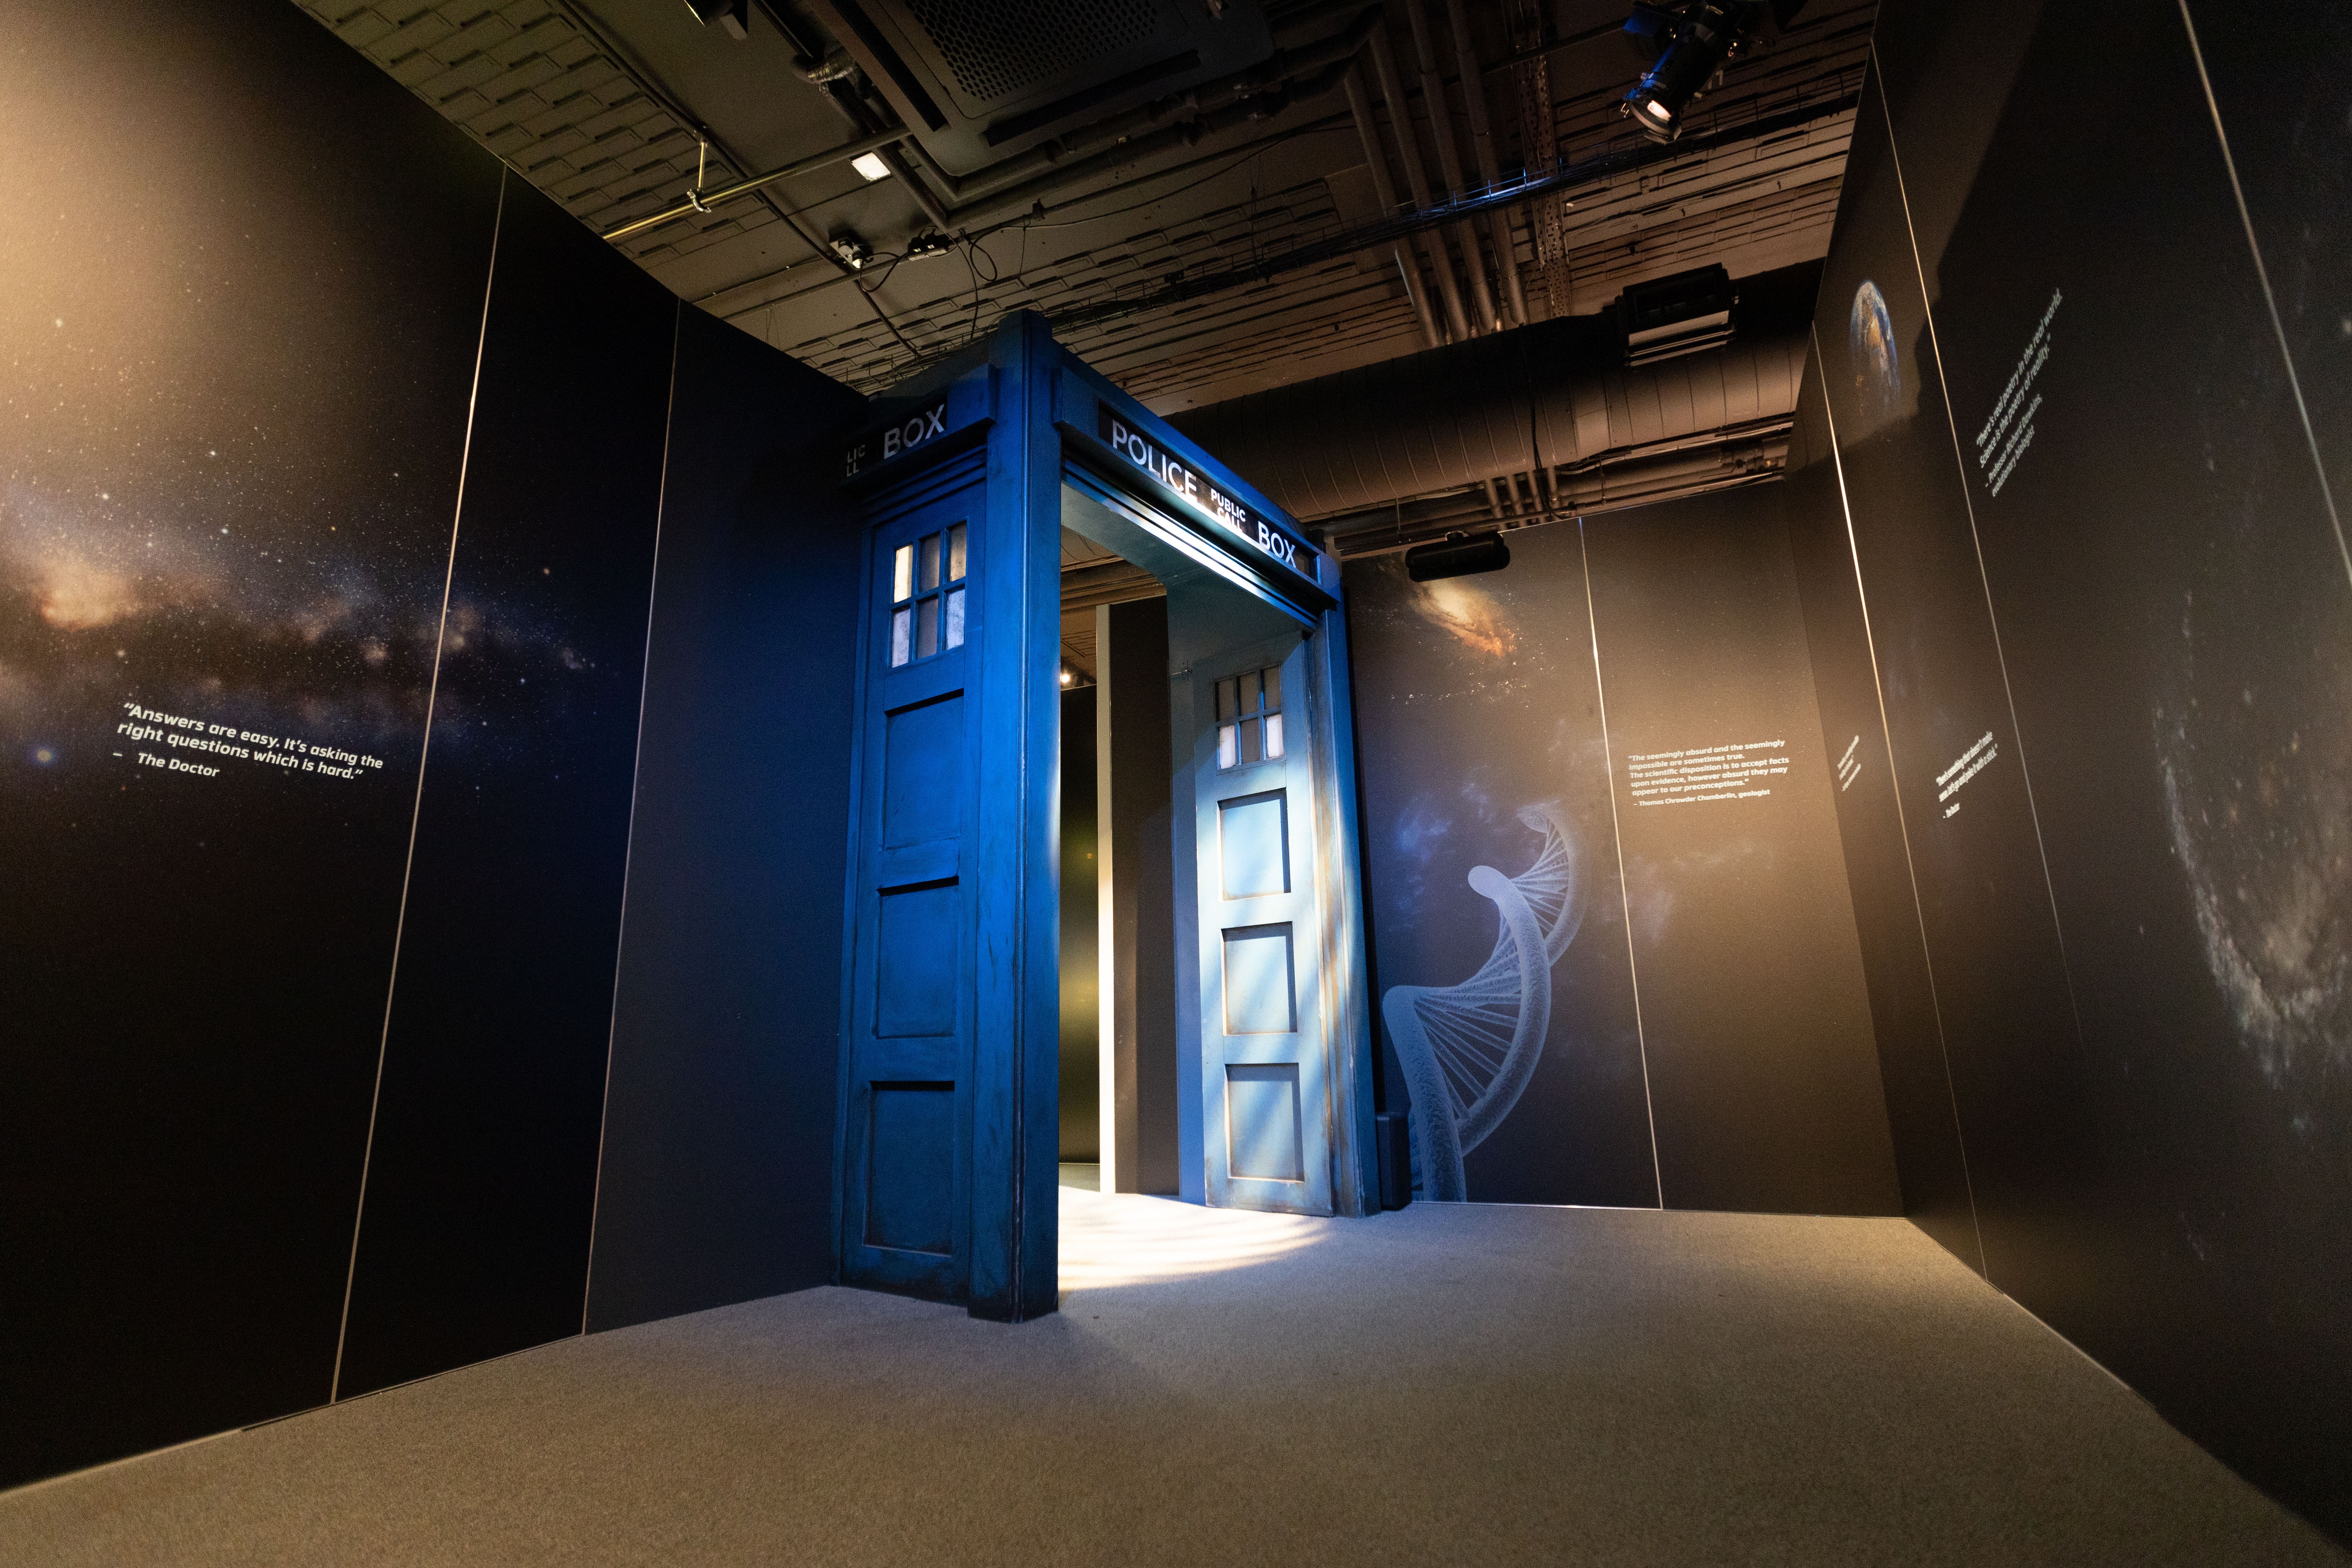 Vortex Corridor. Begin your journey through the TARDIS doors and pass along walls lined with words of wisdom from real scientists... and the Doctor.